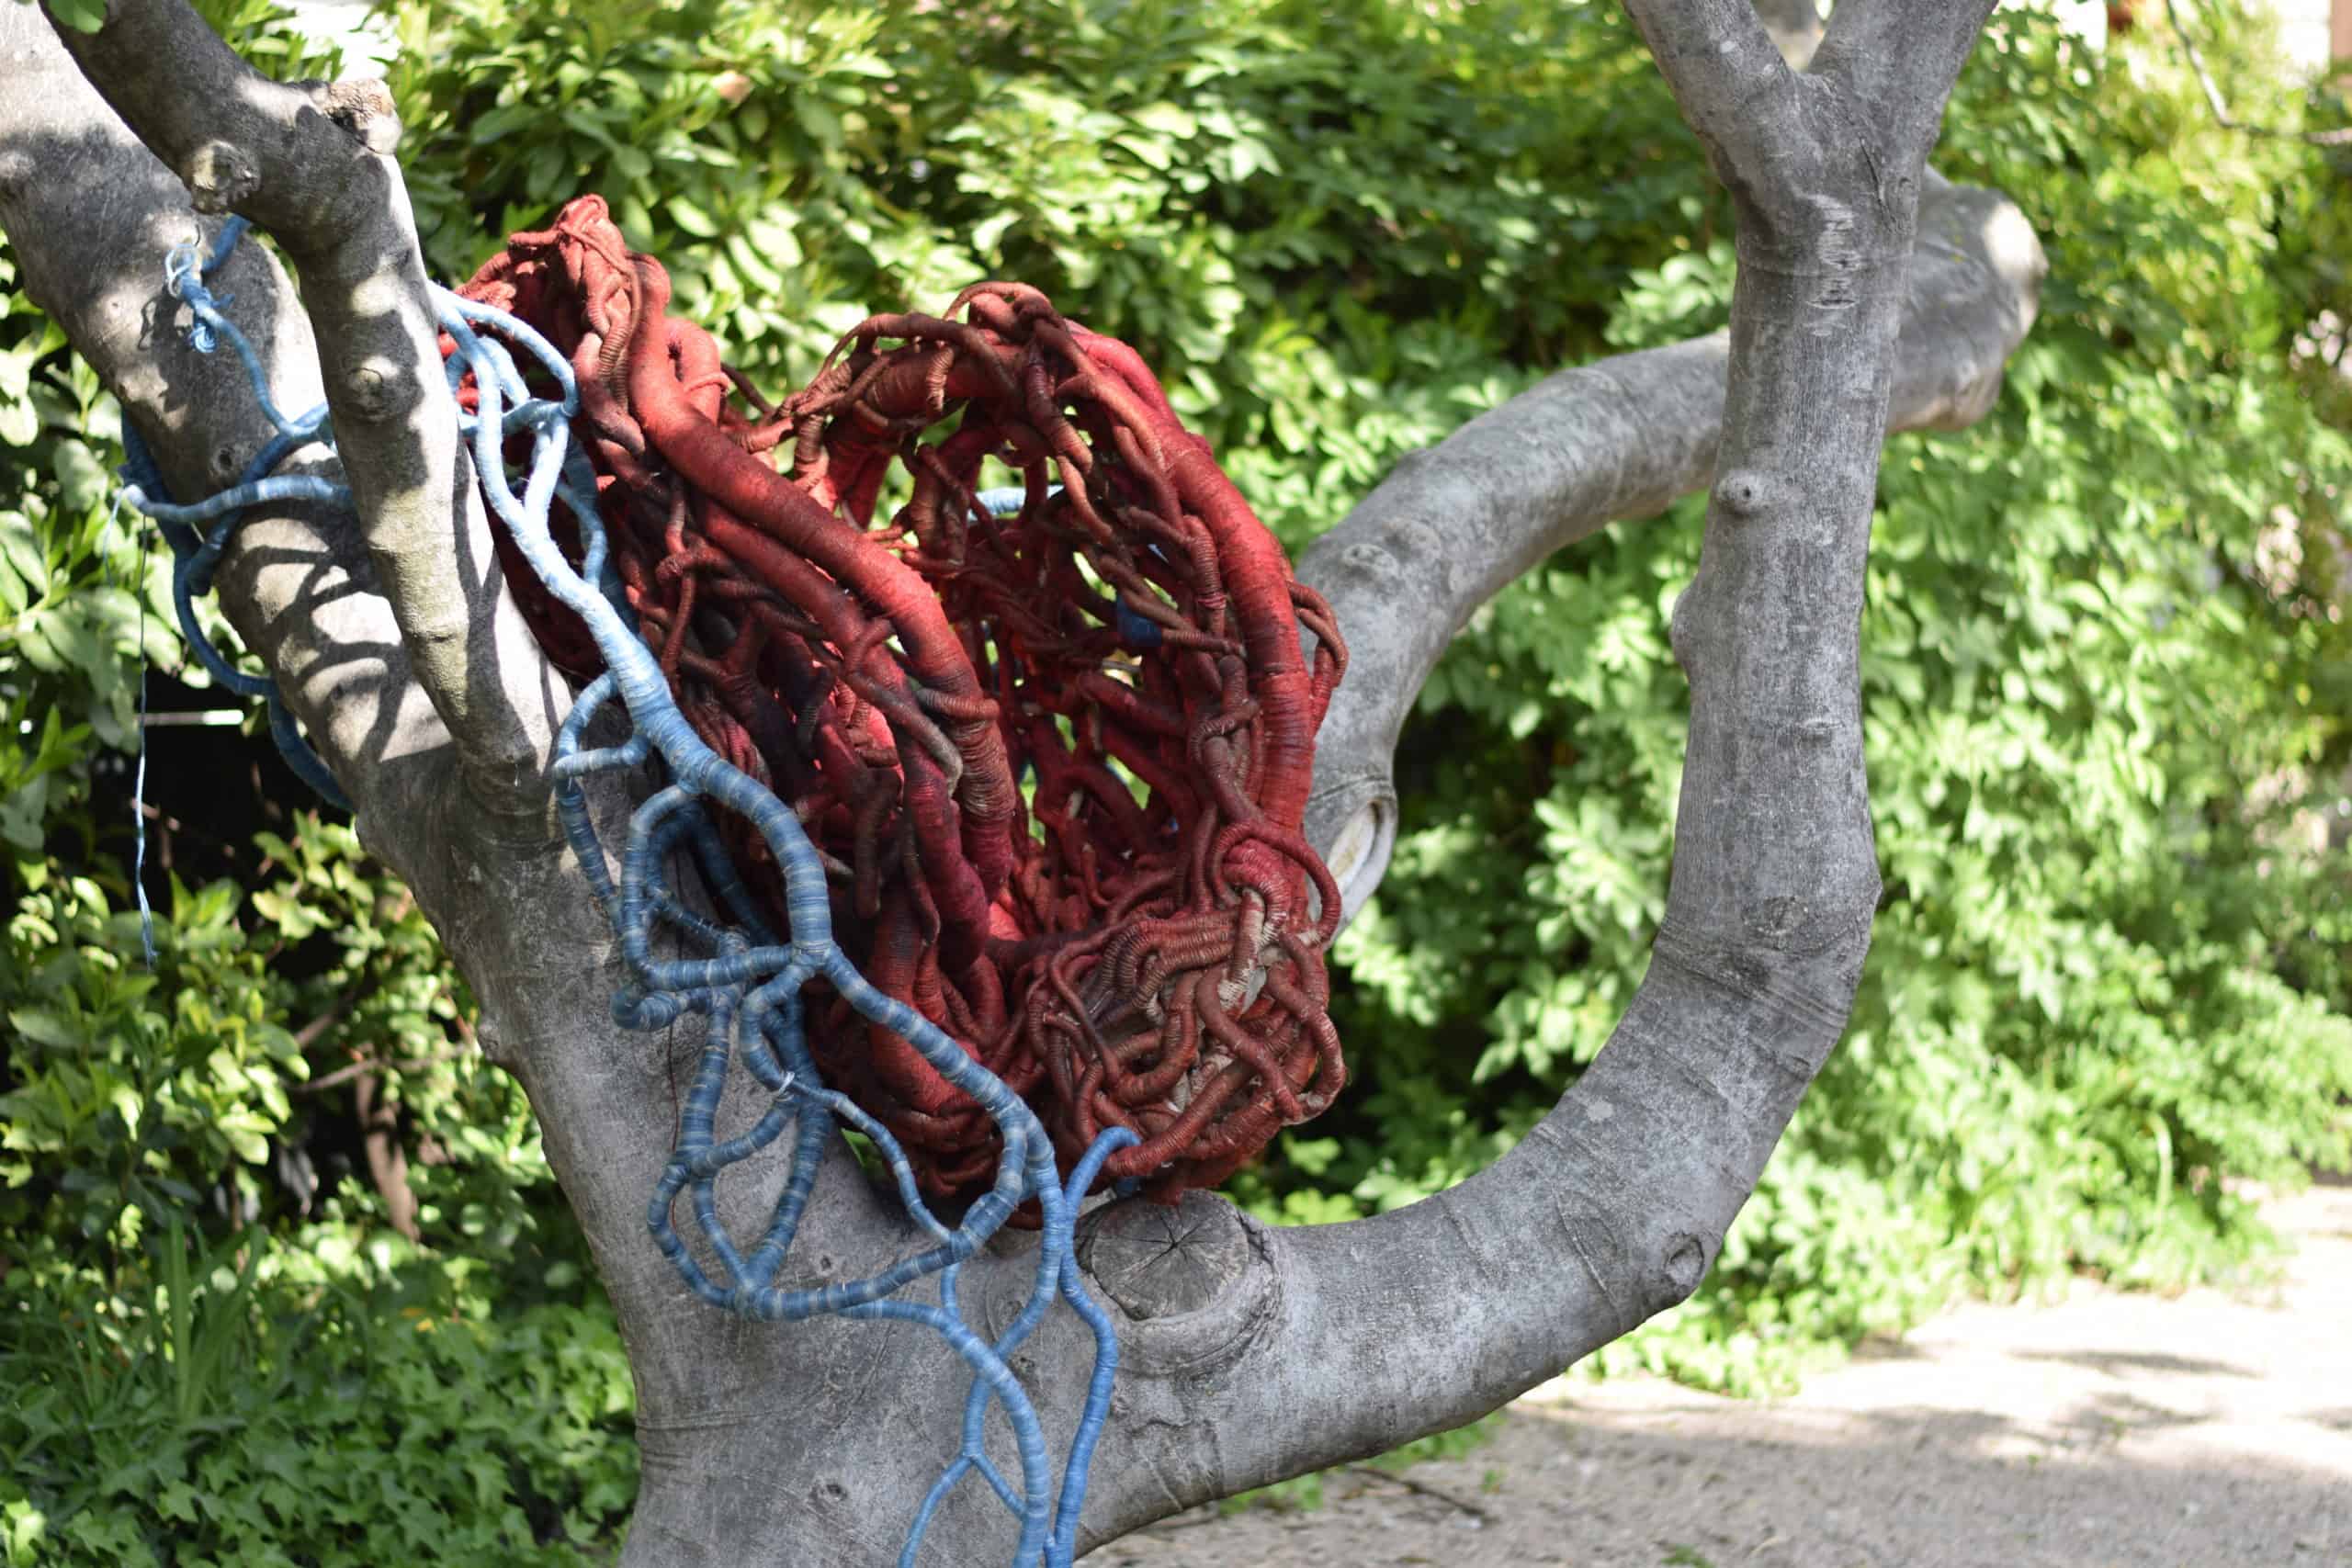 Giant heart-shaped sculpture in a fig tree at Villa Datris foundation for contemporary sculpture by Aude Franjou